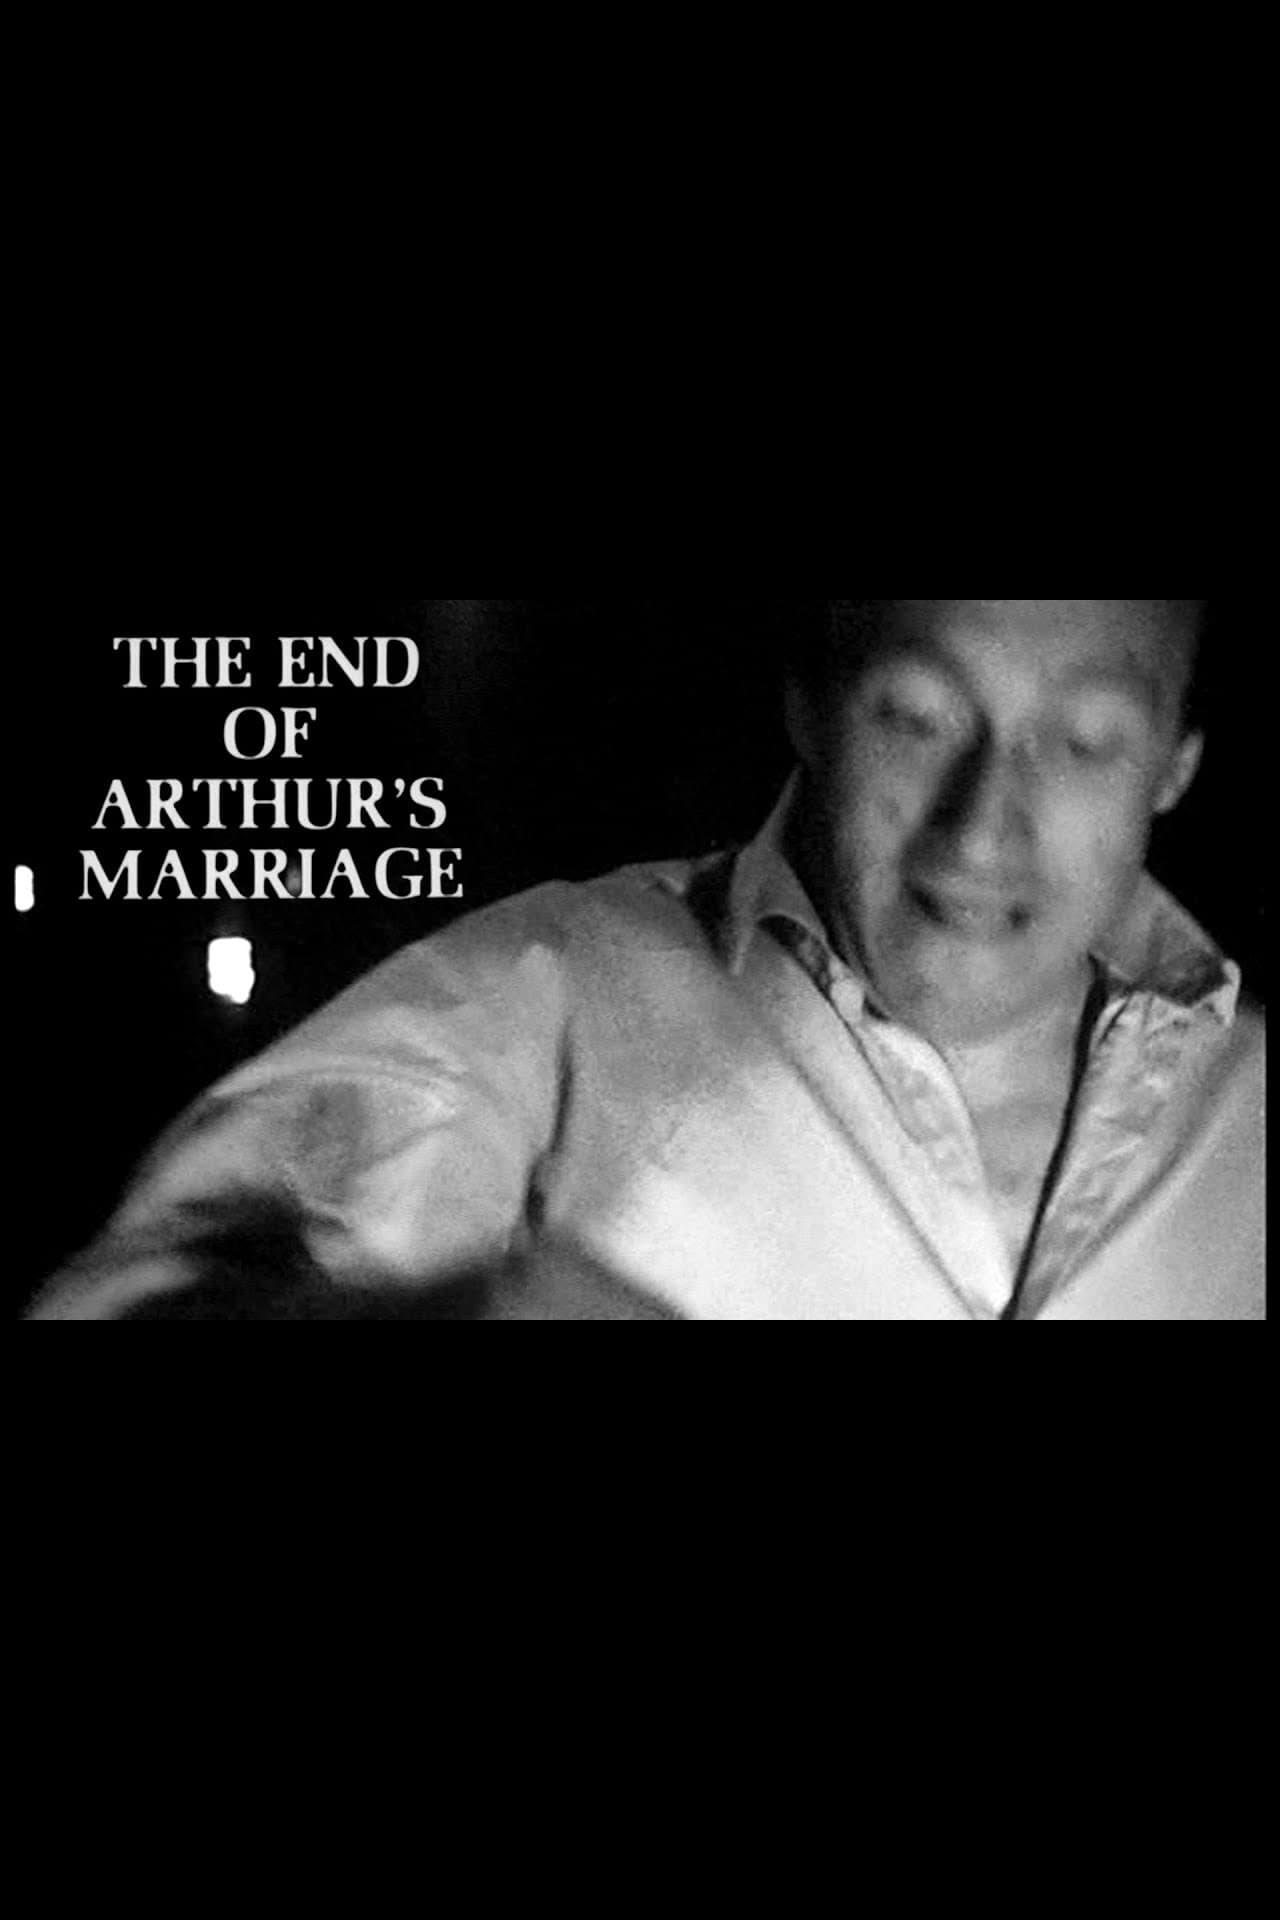 The End of Arthur's Marriage poster